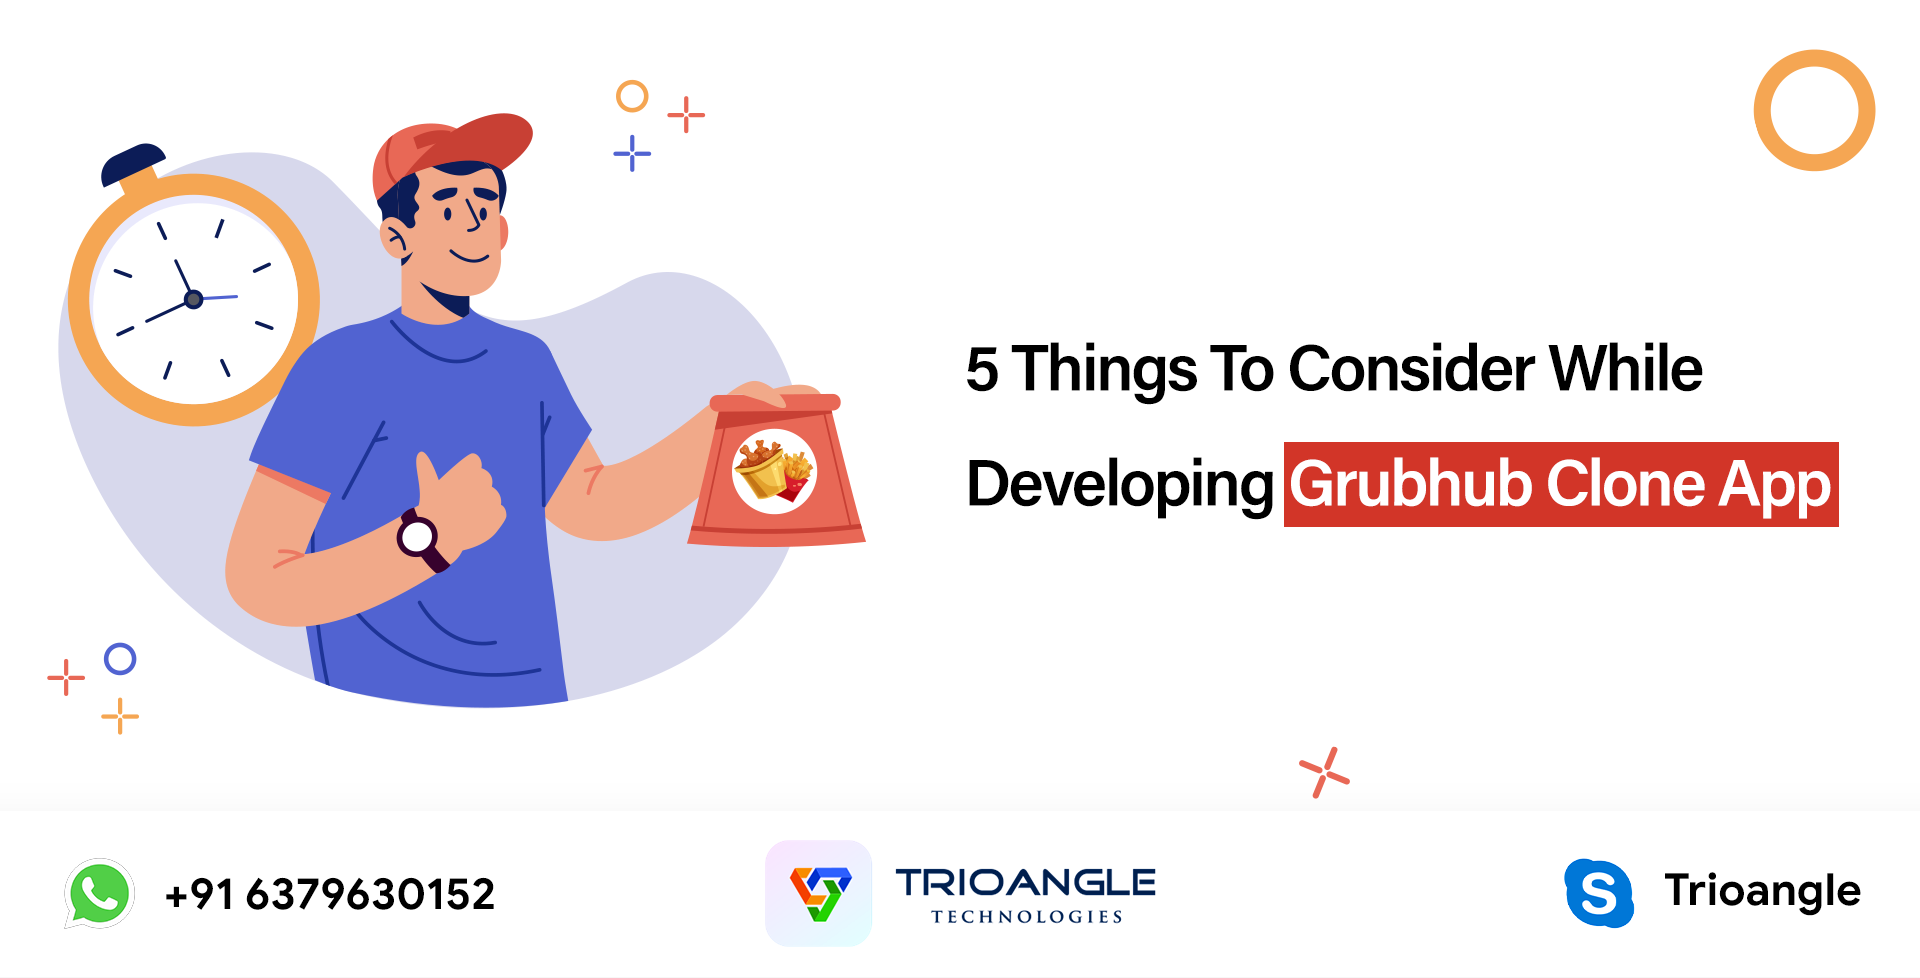 5 Things To Consider While Developing Grubhub Clone App